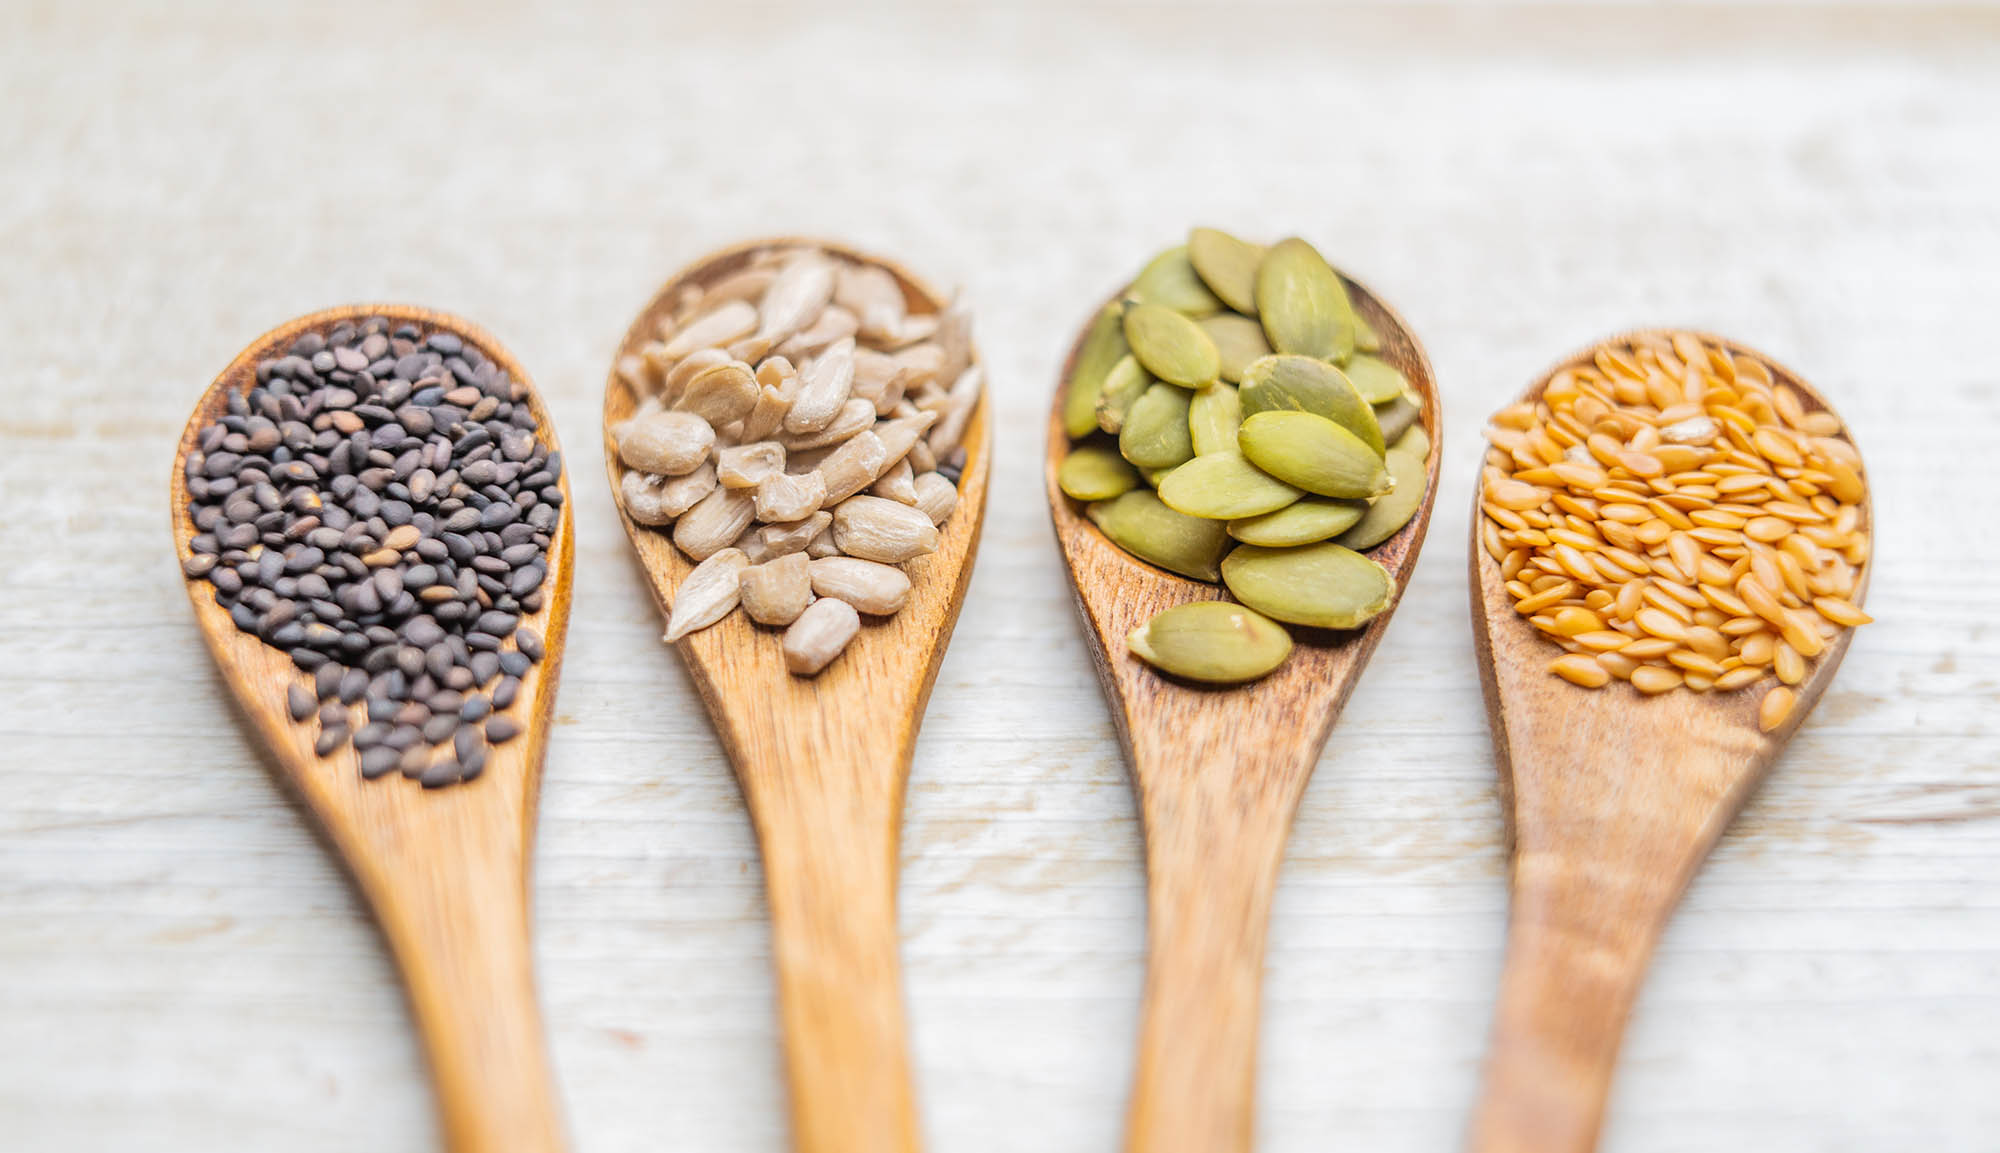 What is Seed Cycling? and does it work to balance hormones?